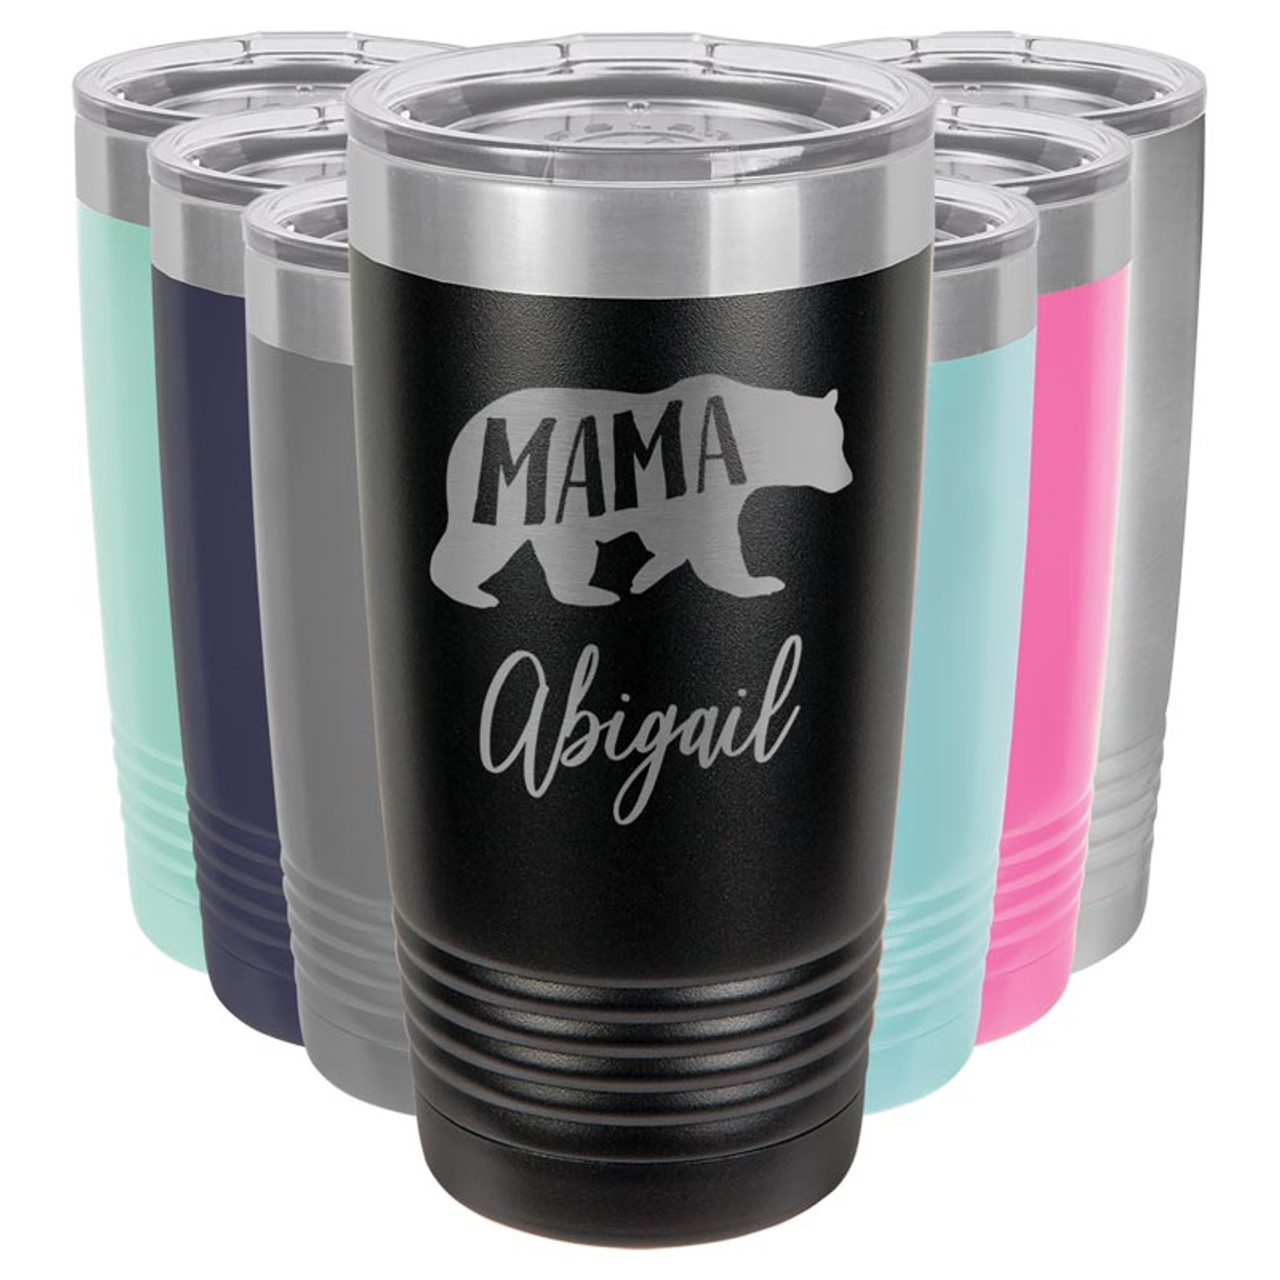 https://cdn11.bigcommerce.com/s-d22a0/images/stencil/1280x1280/products/2460/11561/mama-bear-personalized-tumbler-mothers-day-gifts__80921.1591038492.jpg?c=2